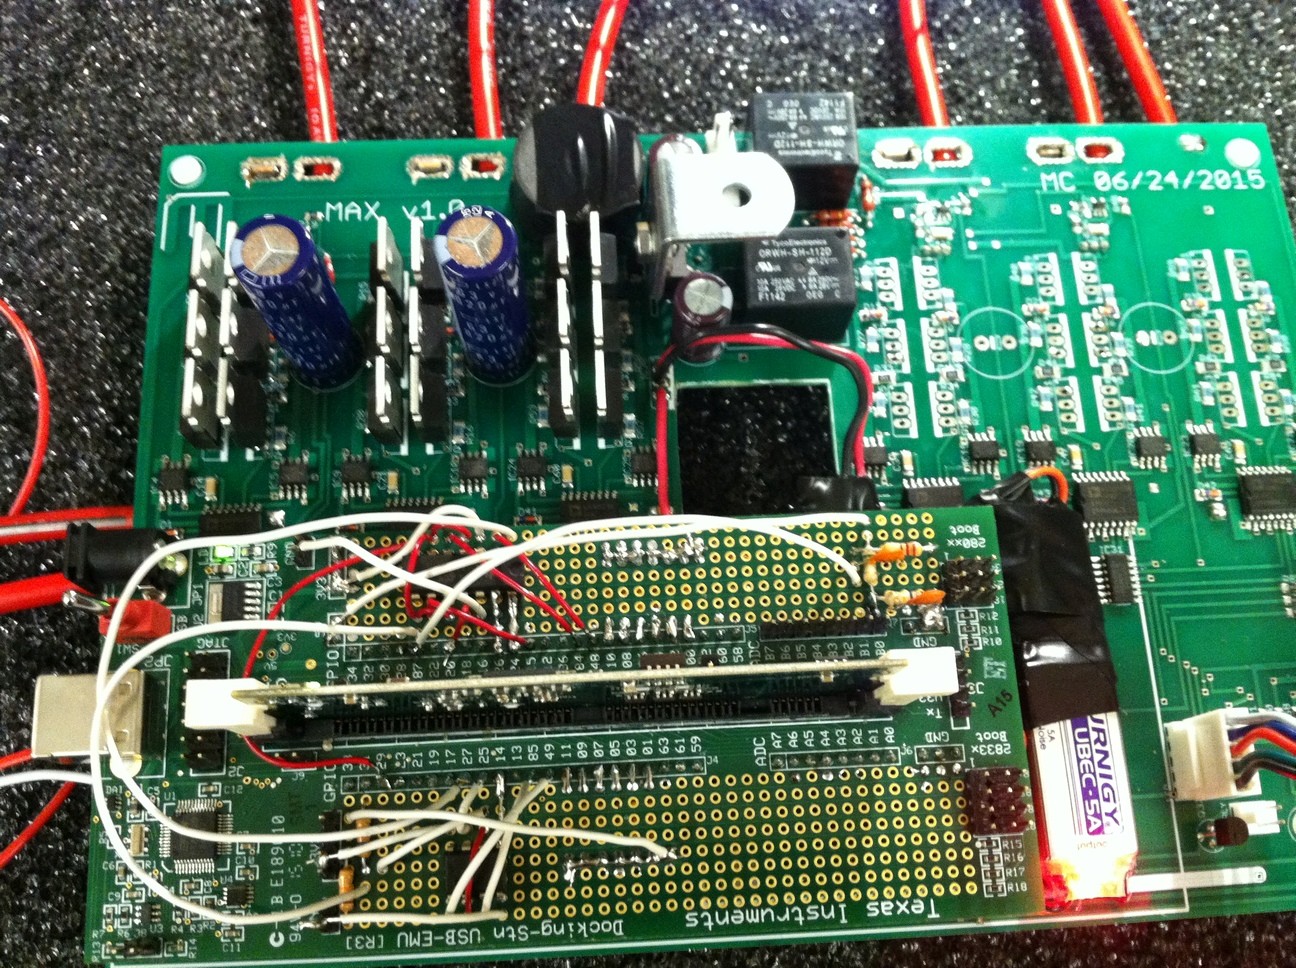 The board is ready for controlling one motor